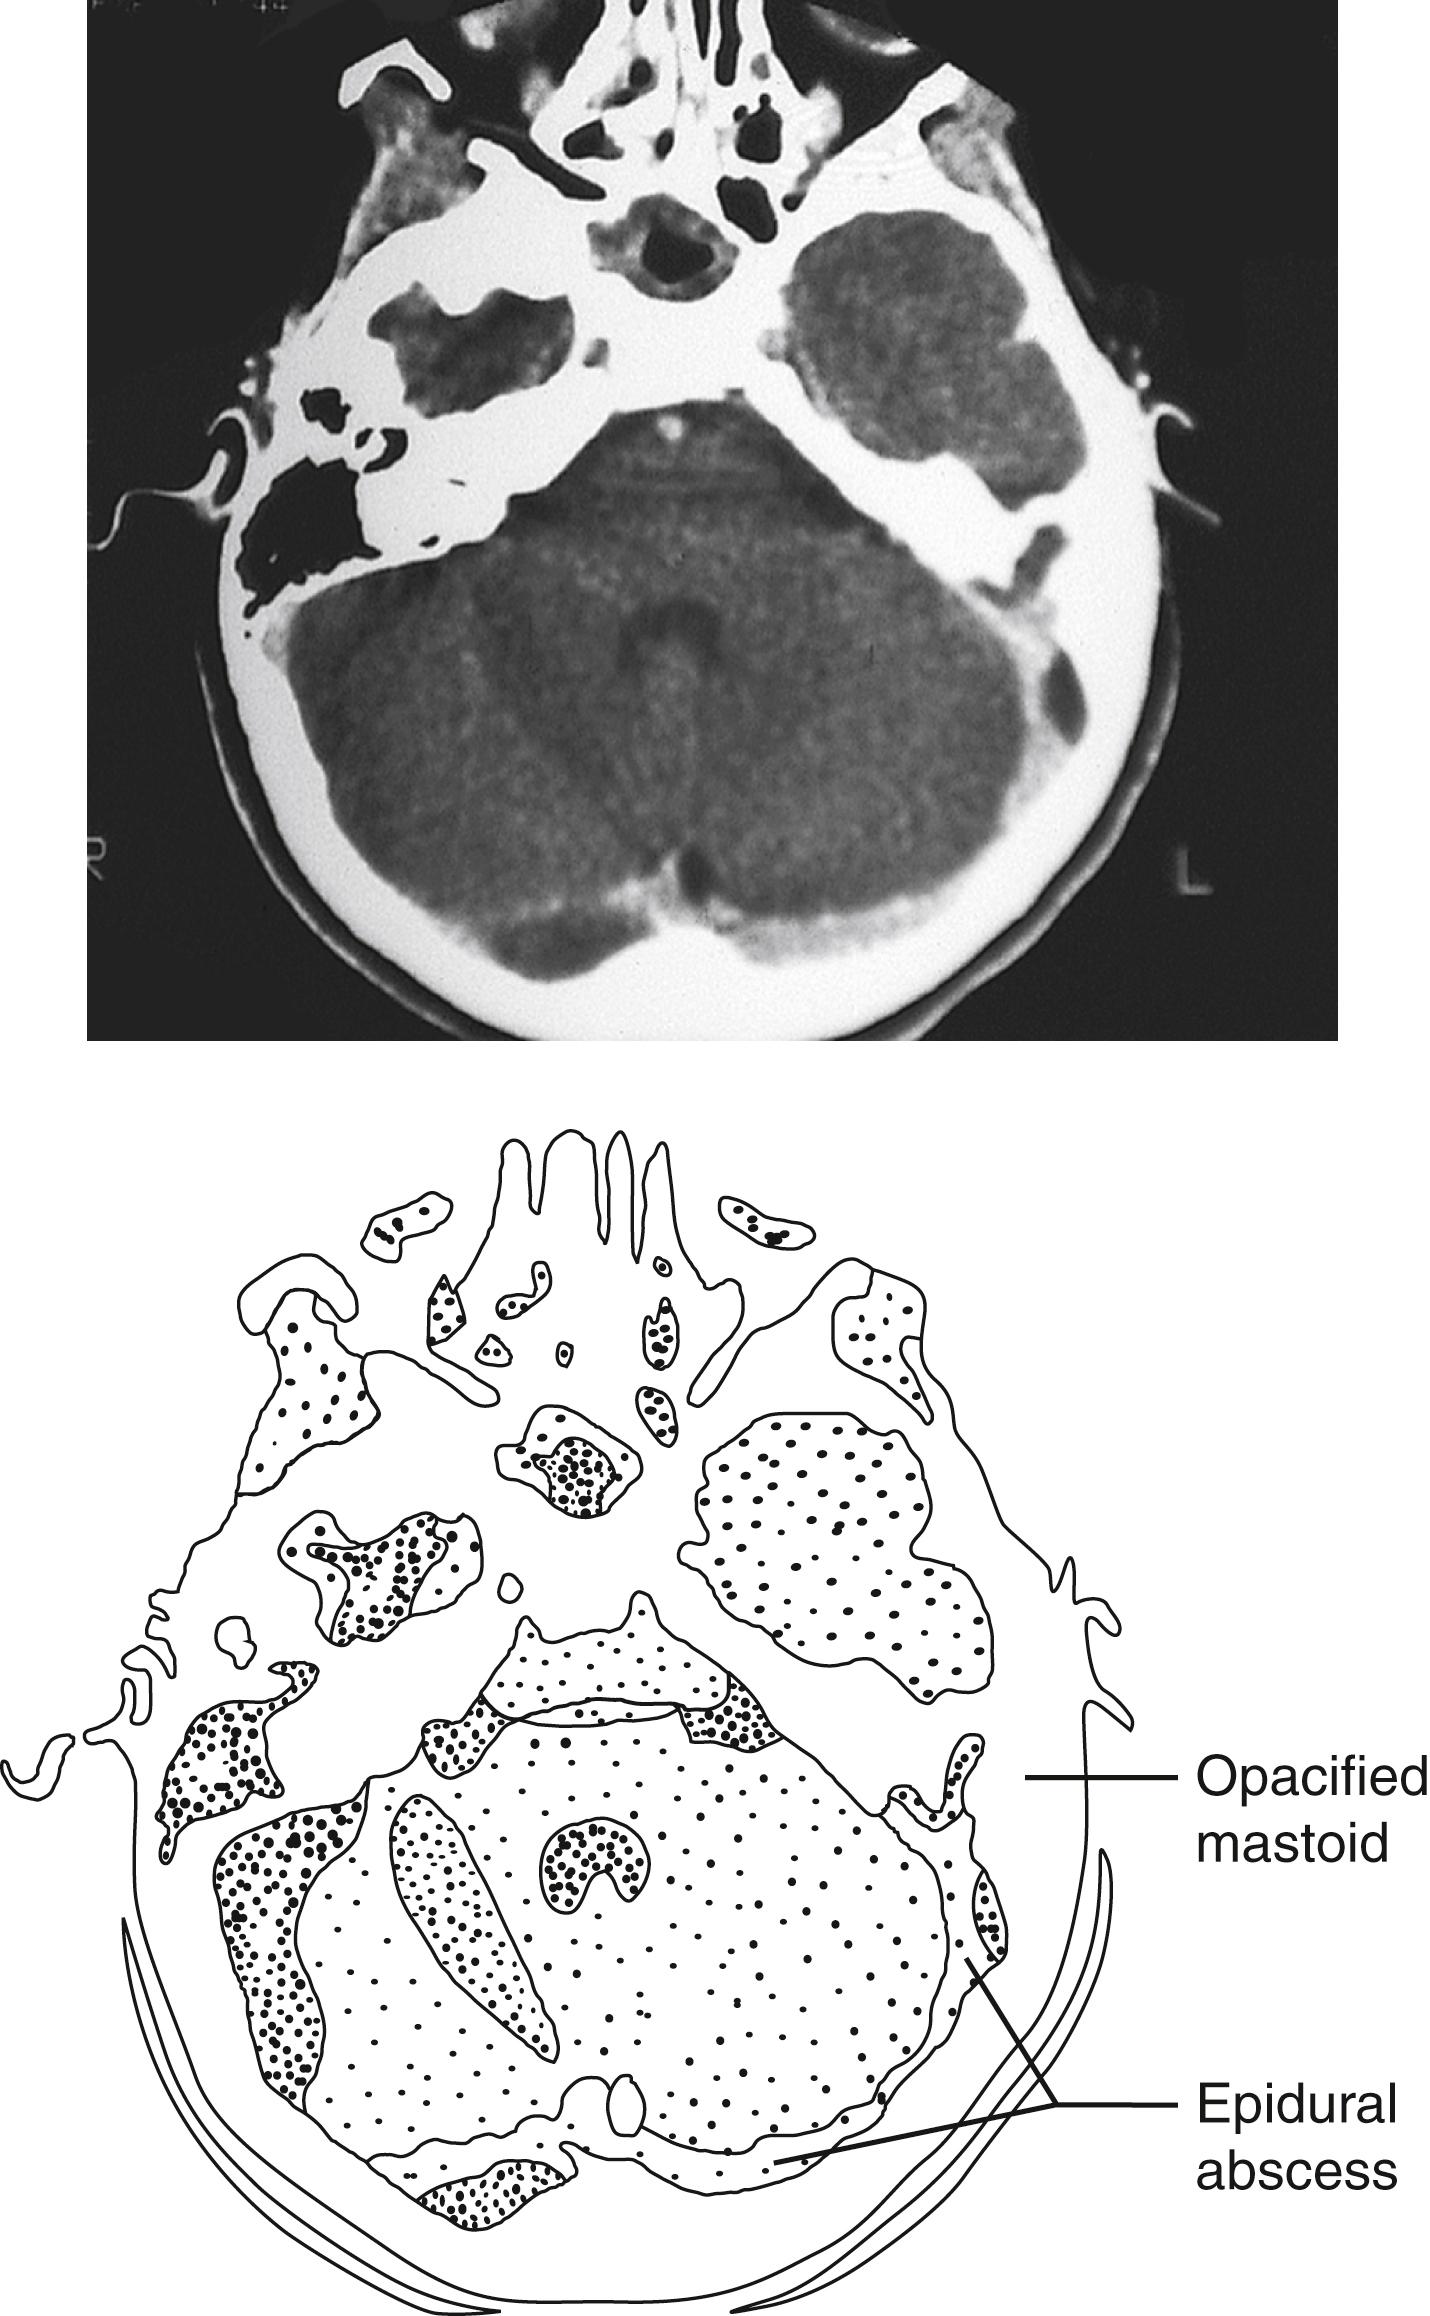 Fig. 24.11, Mastoiditis. The computed tomography (CT) image shows acute left-sided mastoiditis with the complication of an associated epidural abscess delineated in the diagram.